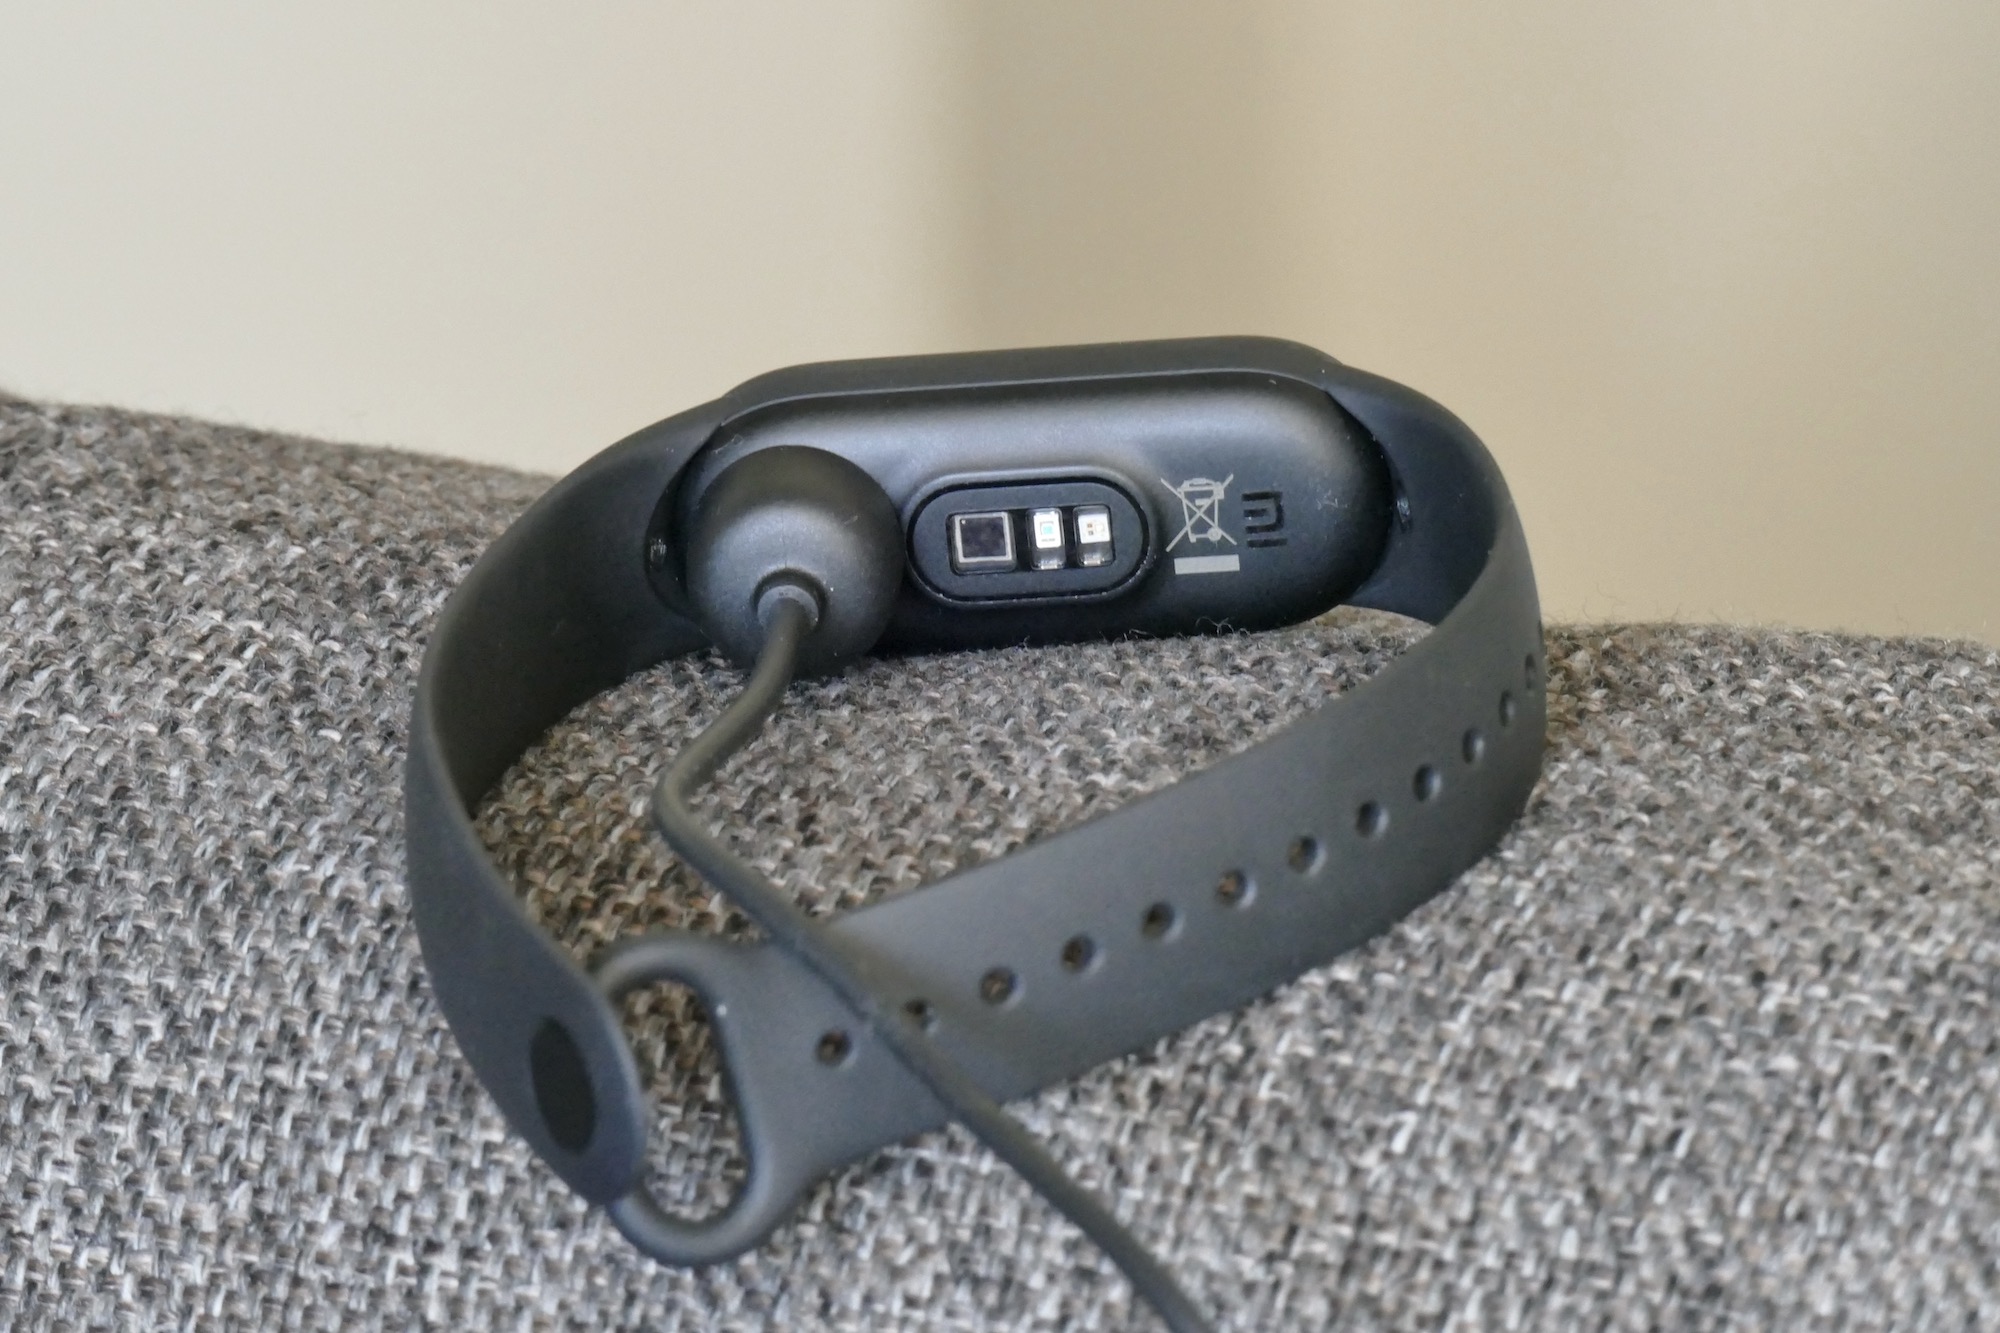 Xiaomi Mi Smart Band 6 Global Edition now available: Cheap fitness